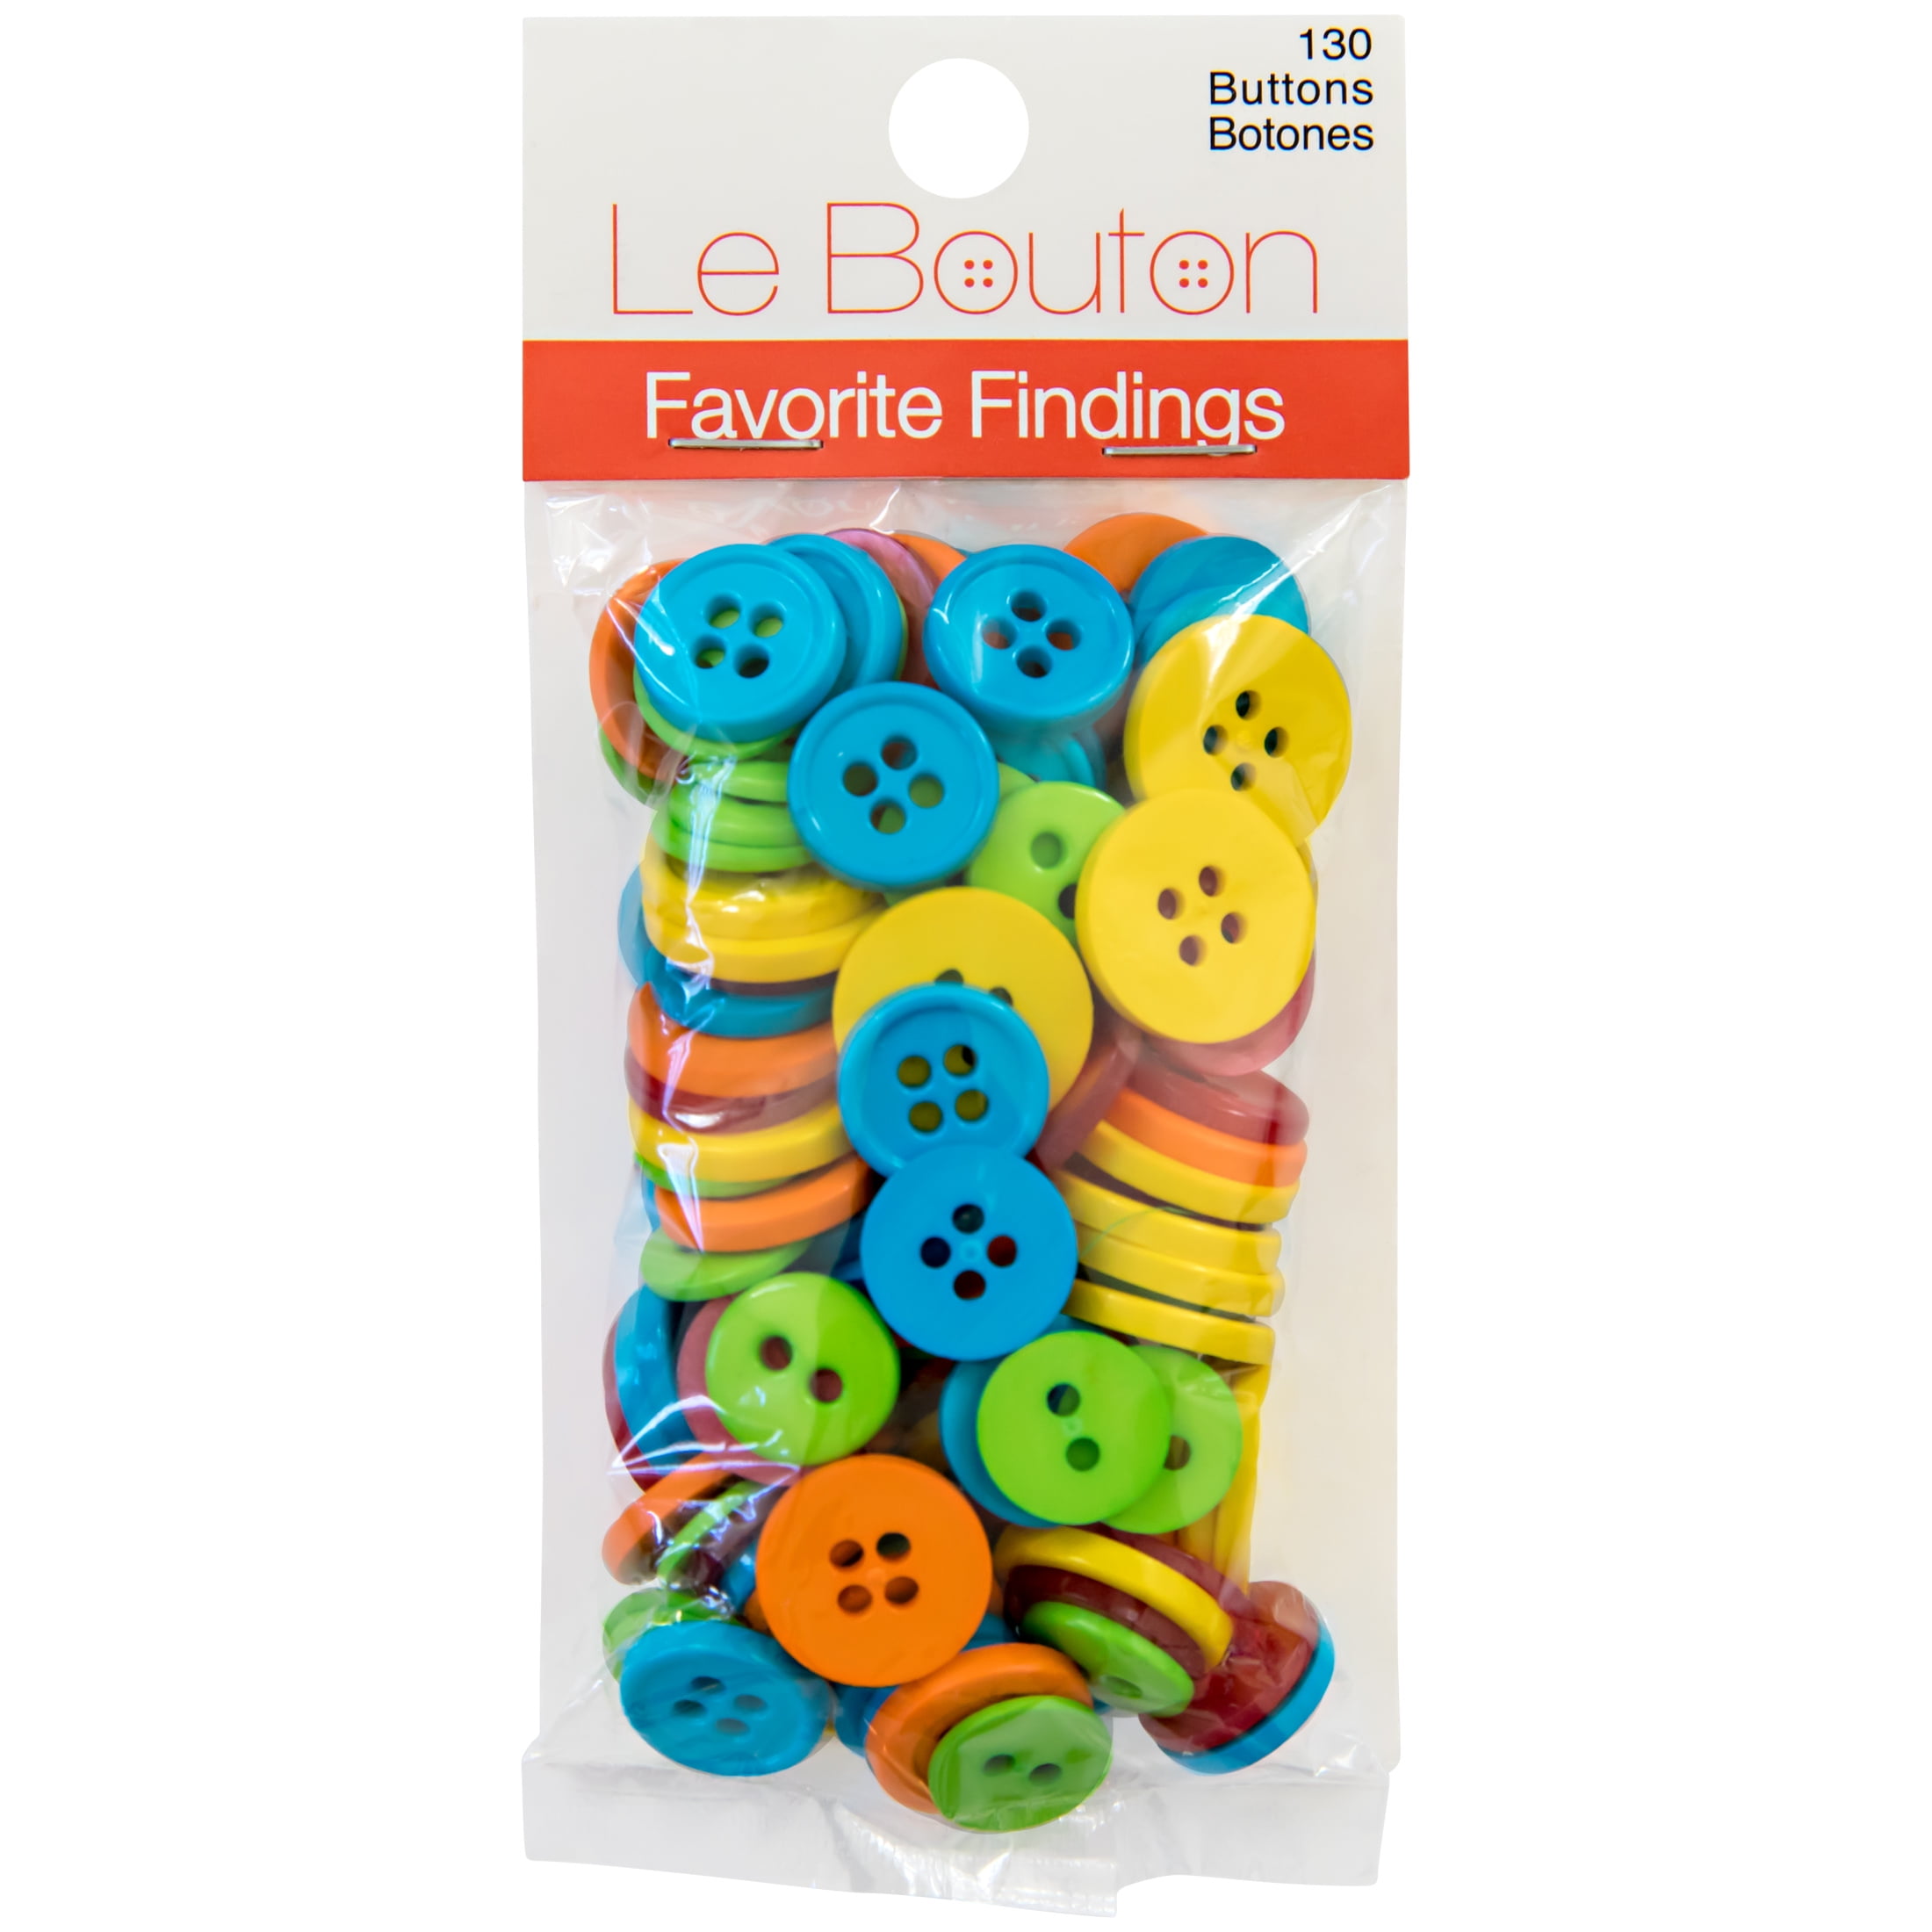 Favorite Findings Citrus Assorted Sew Thru Buttons, 130 Pieces